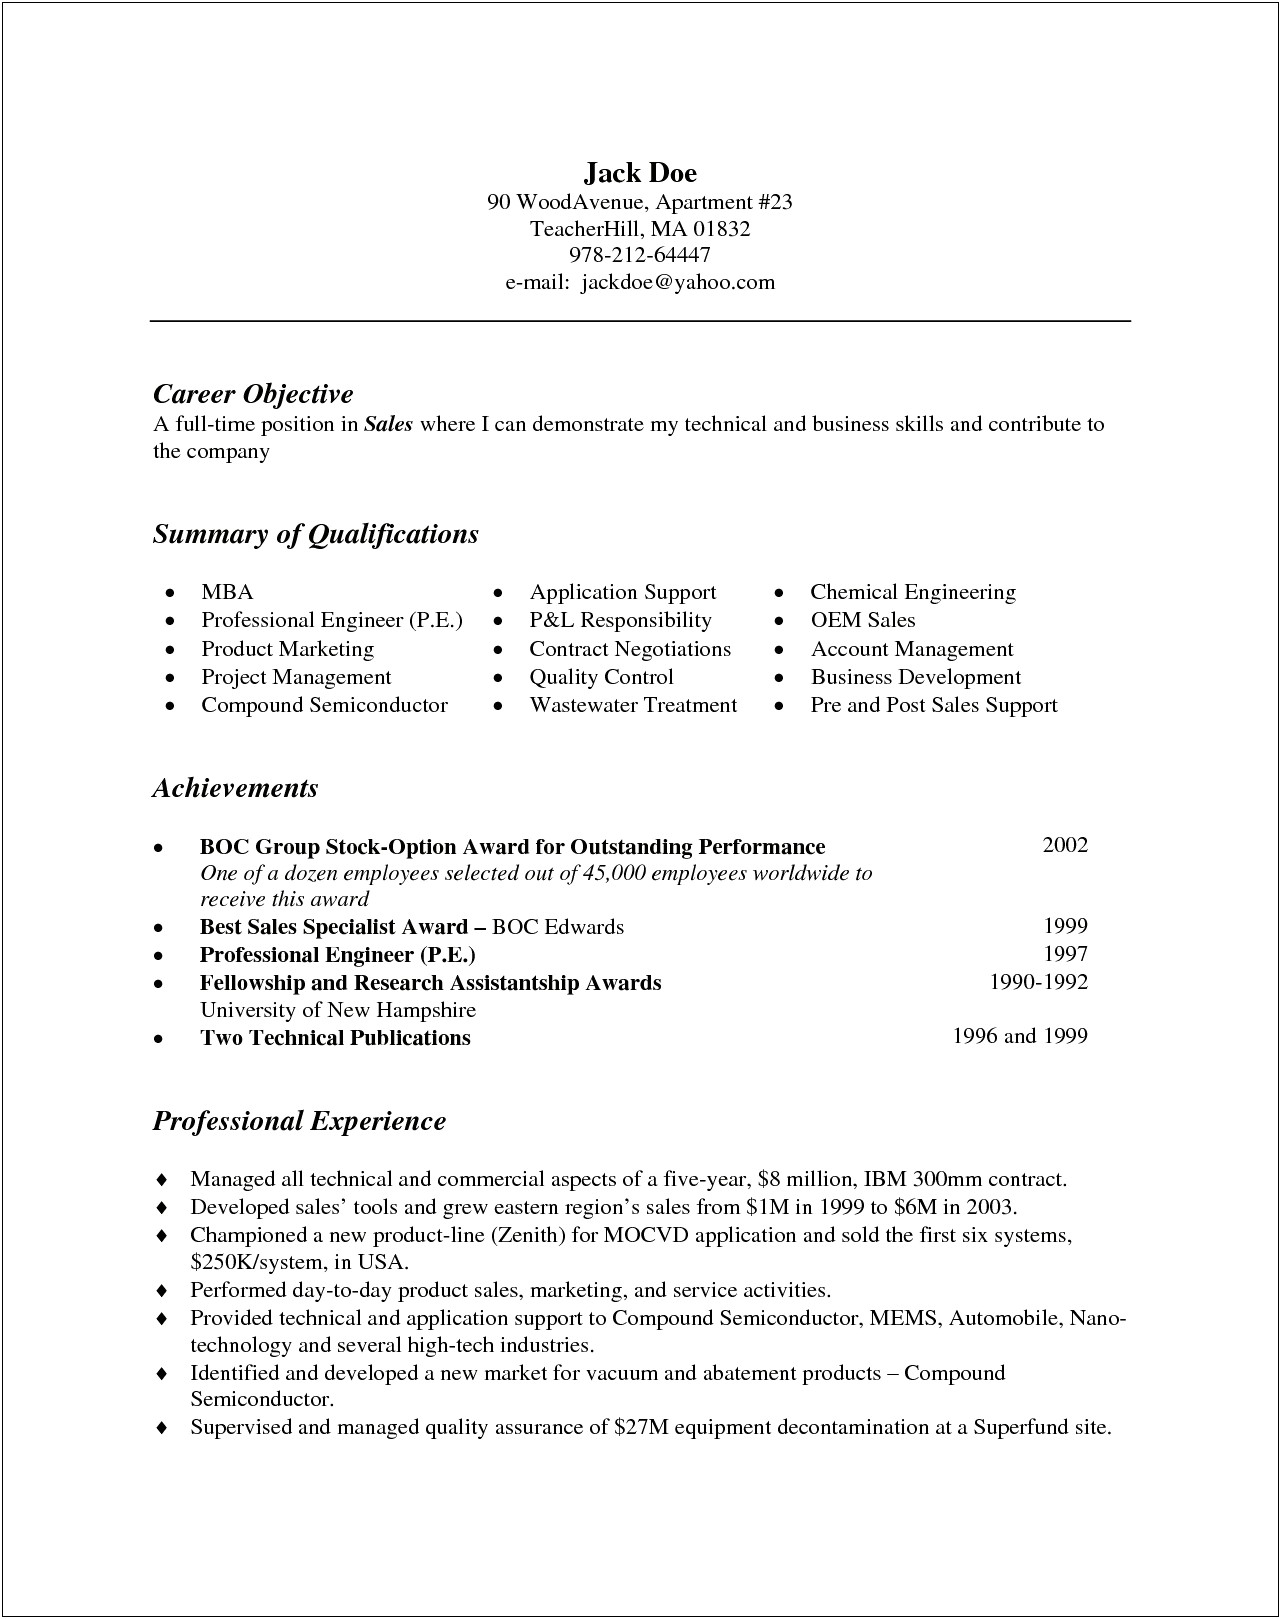 Example Resume Without Bullet Points